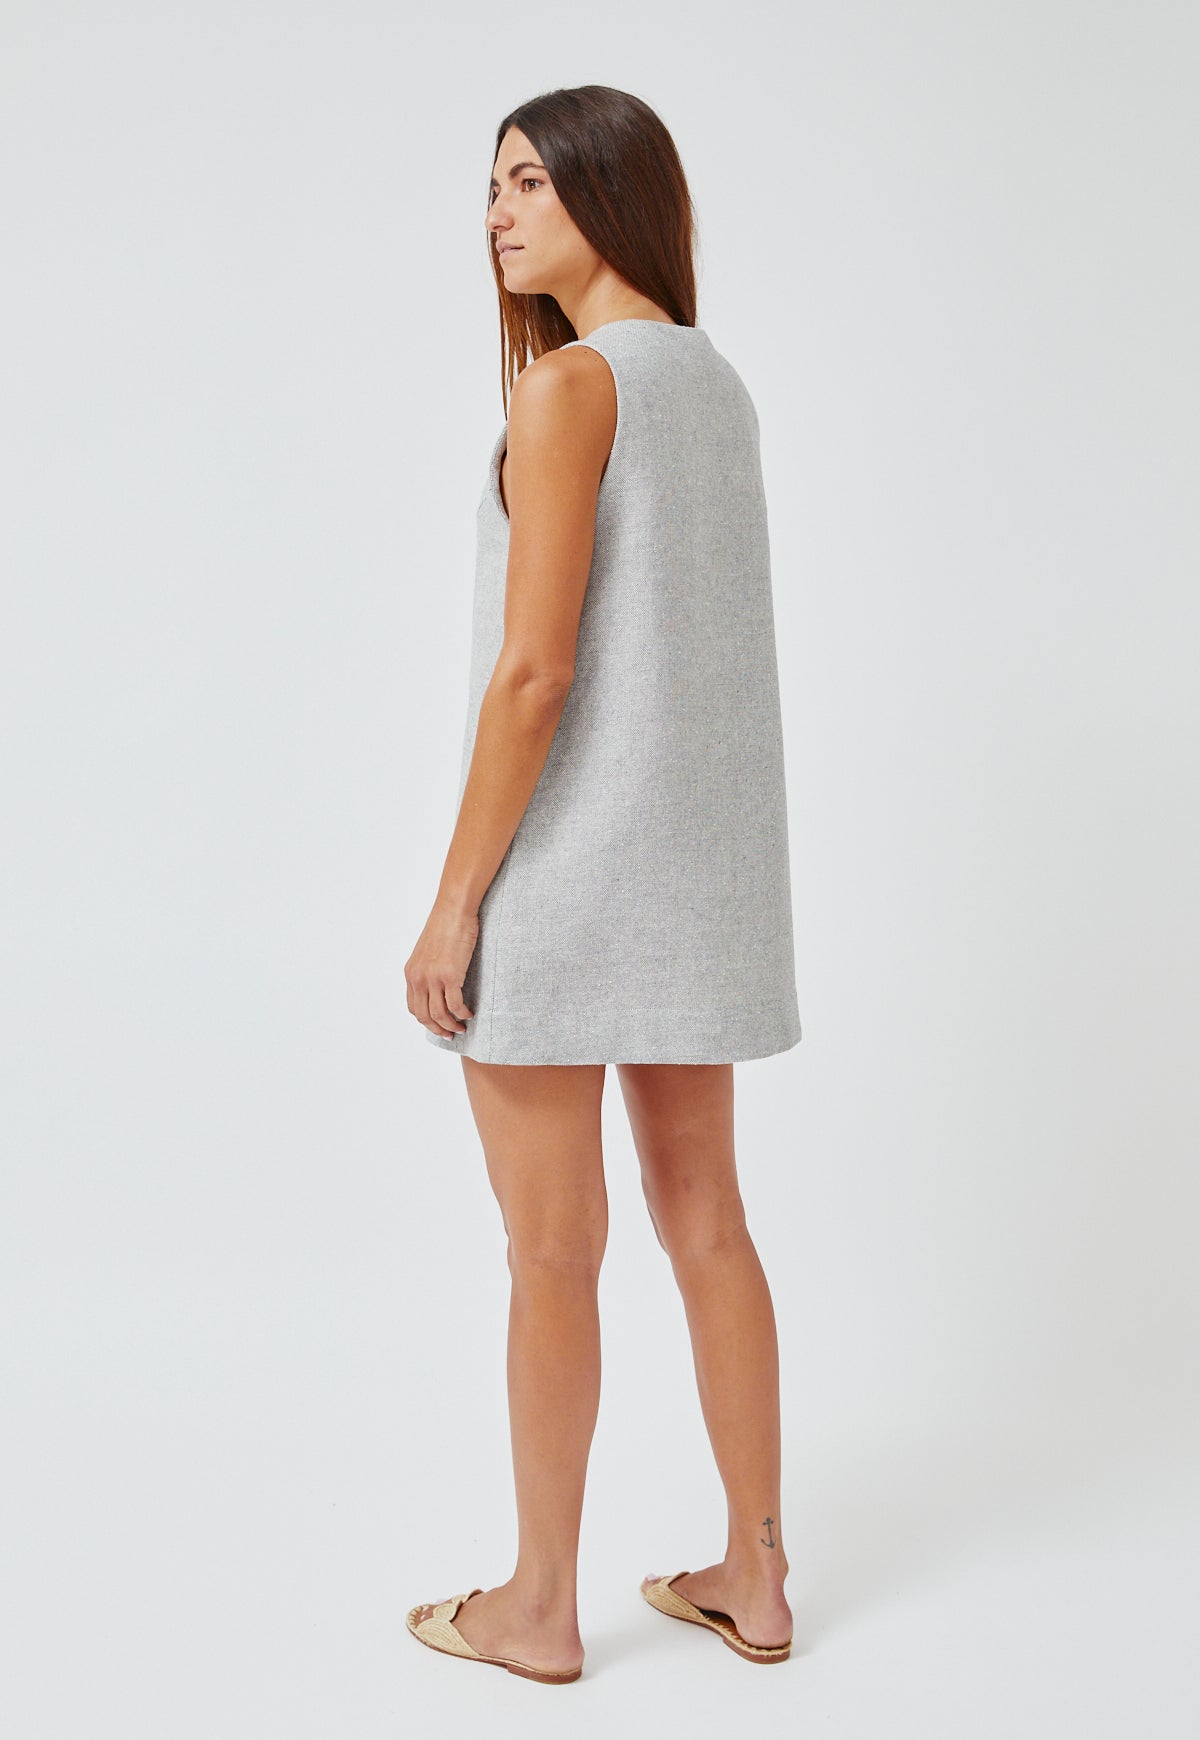 THE SCALLOP MINI DRESS in VINTAGE BLUE SUMMER TWEED LINEN